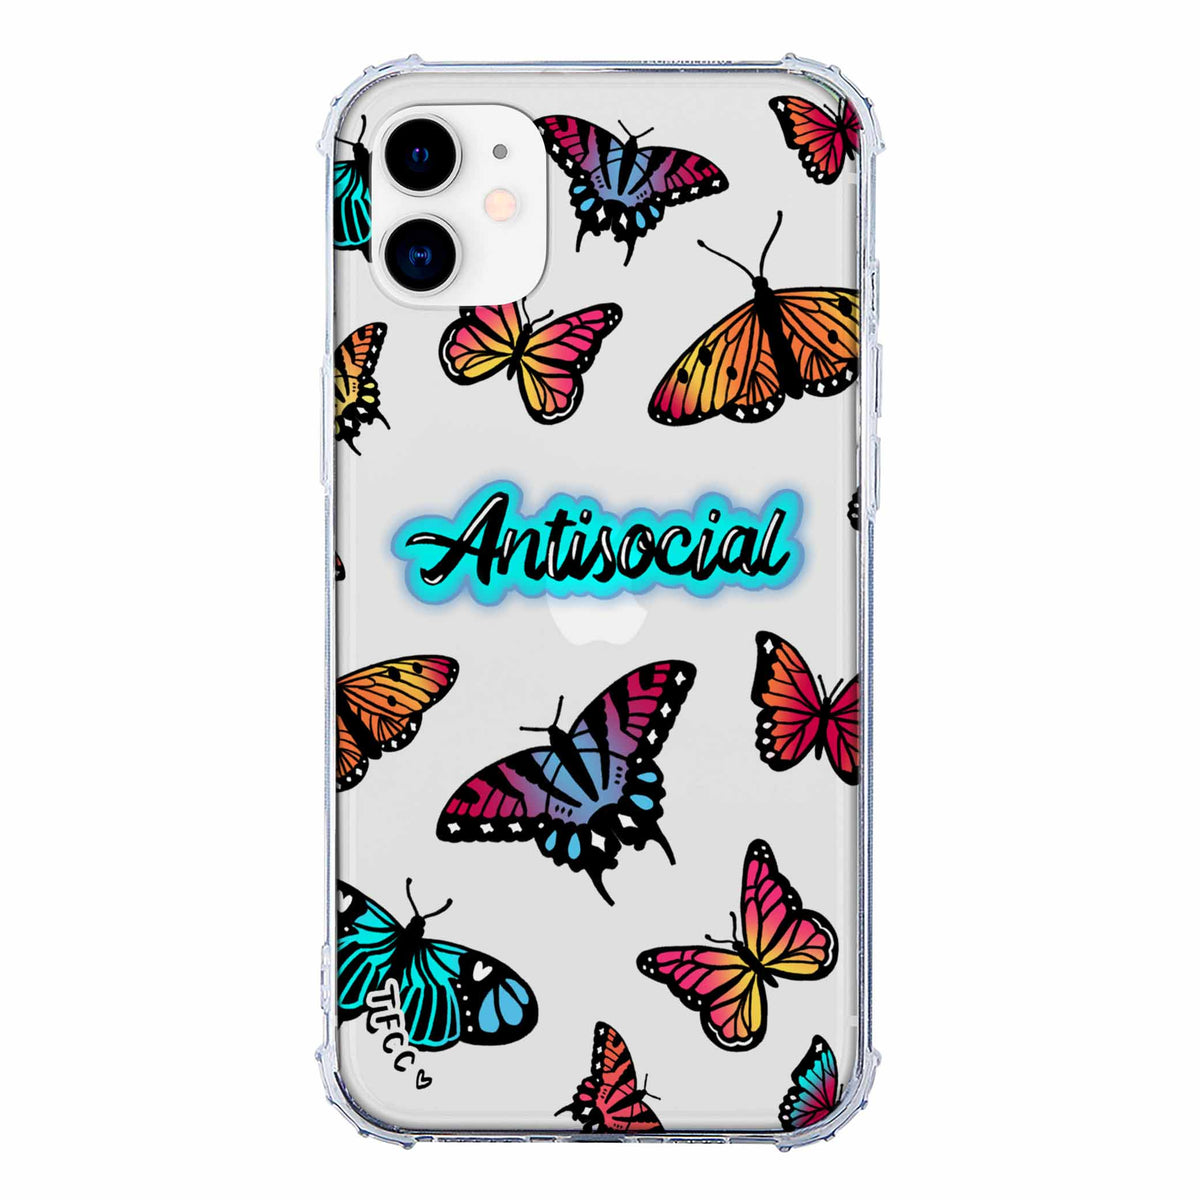 ANTISOCIAL BUTTERFLY CLEAR CASE - thefonecasecompany